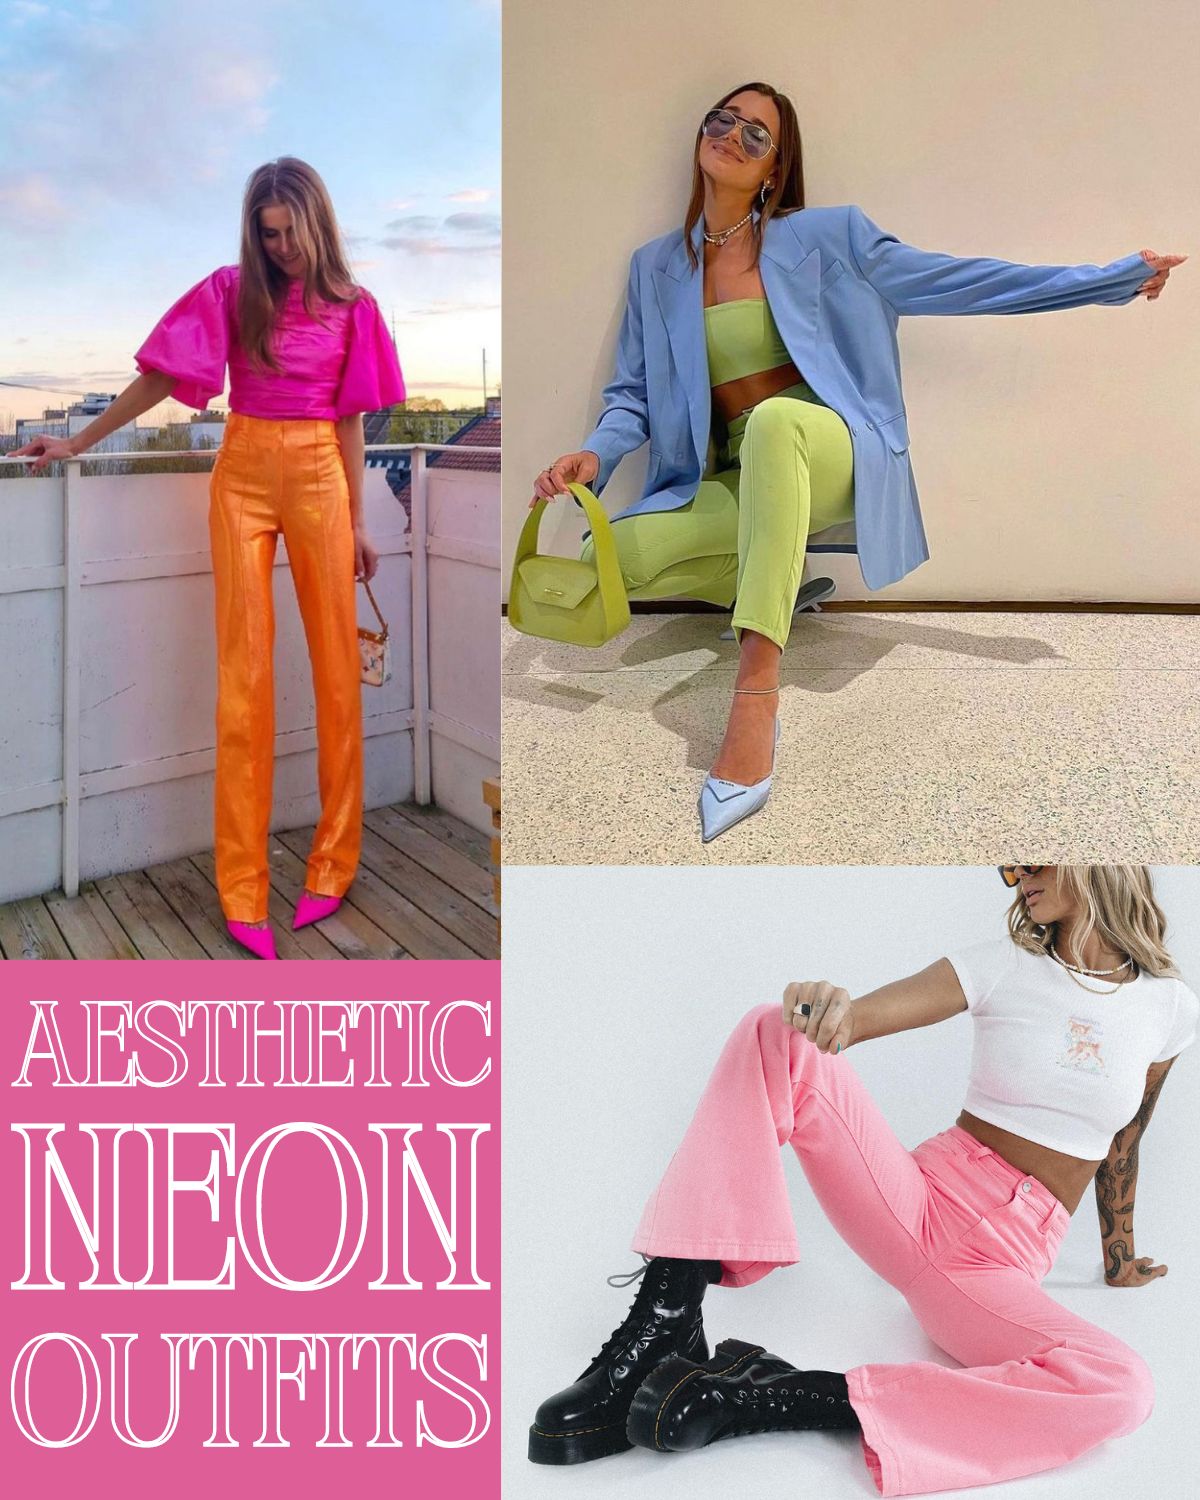 Three girls aesthetic neon outfit ideas